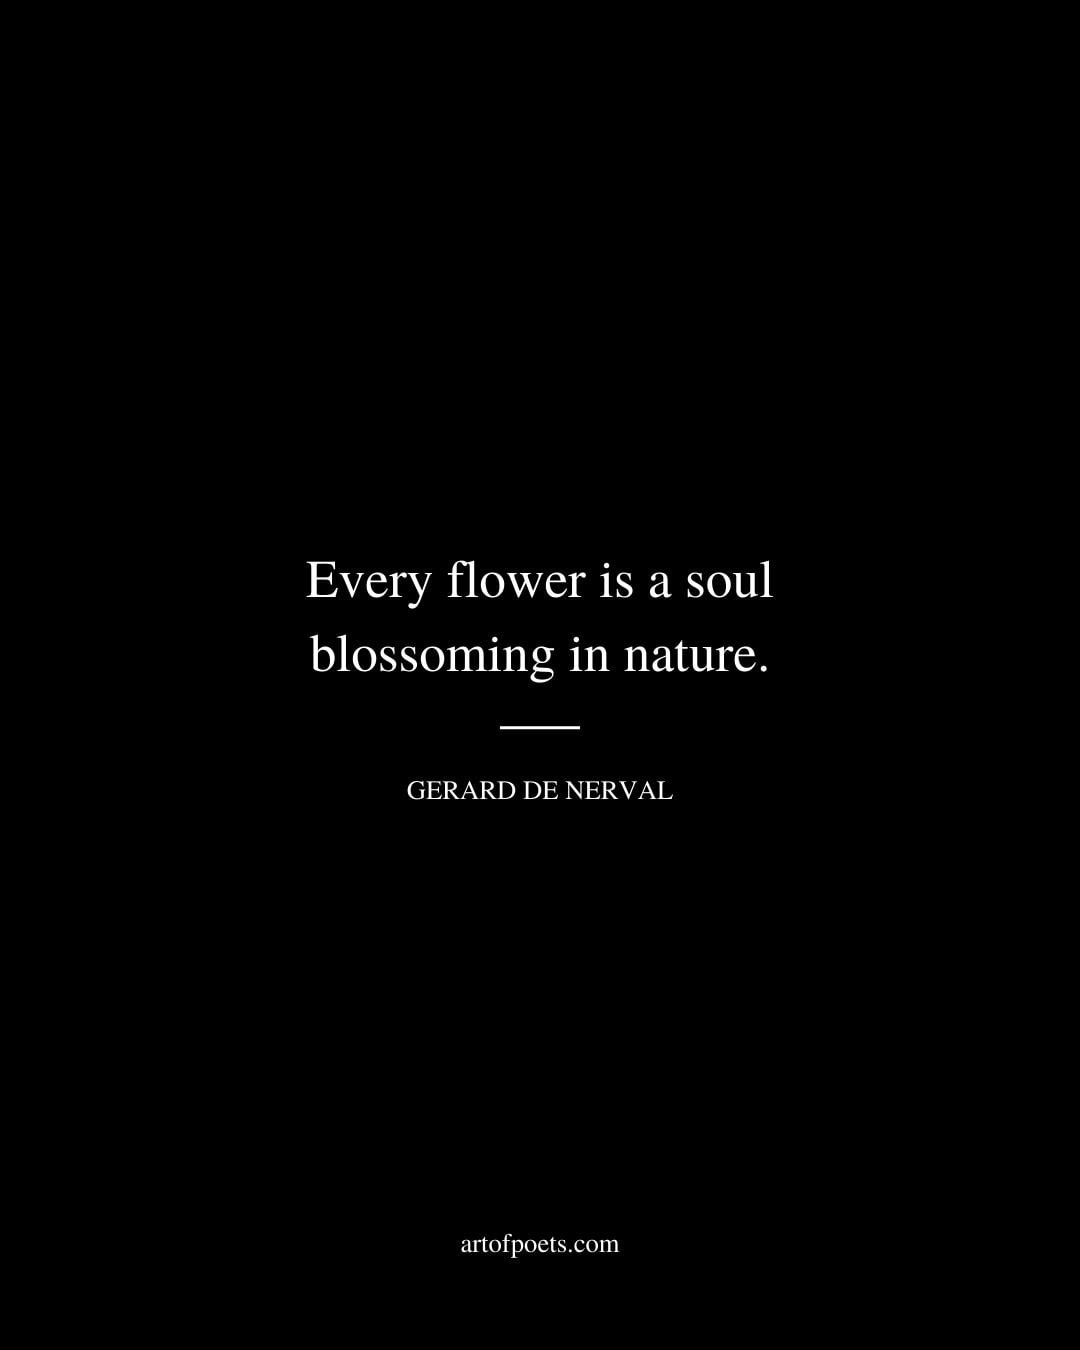 Every flower is a soul blossoming in nature. Gerard De Nerval